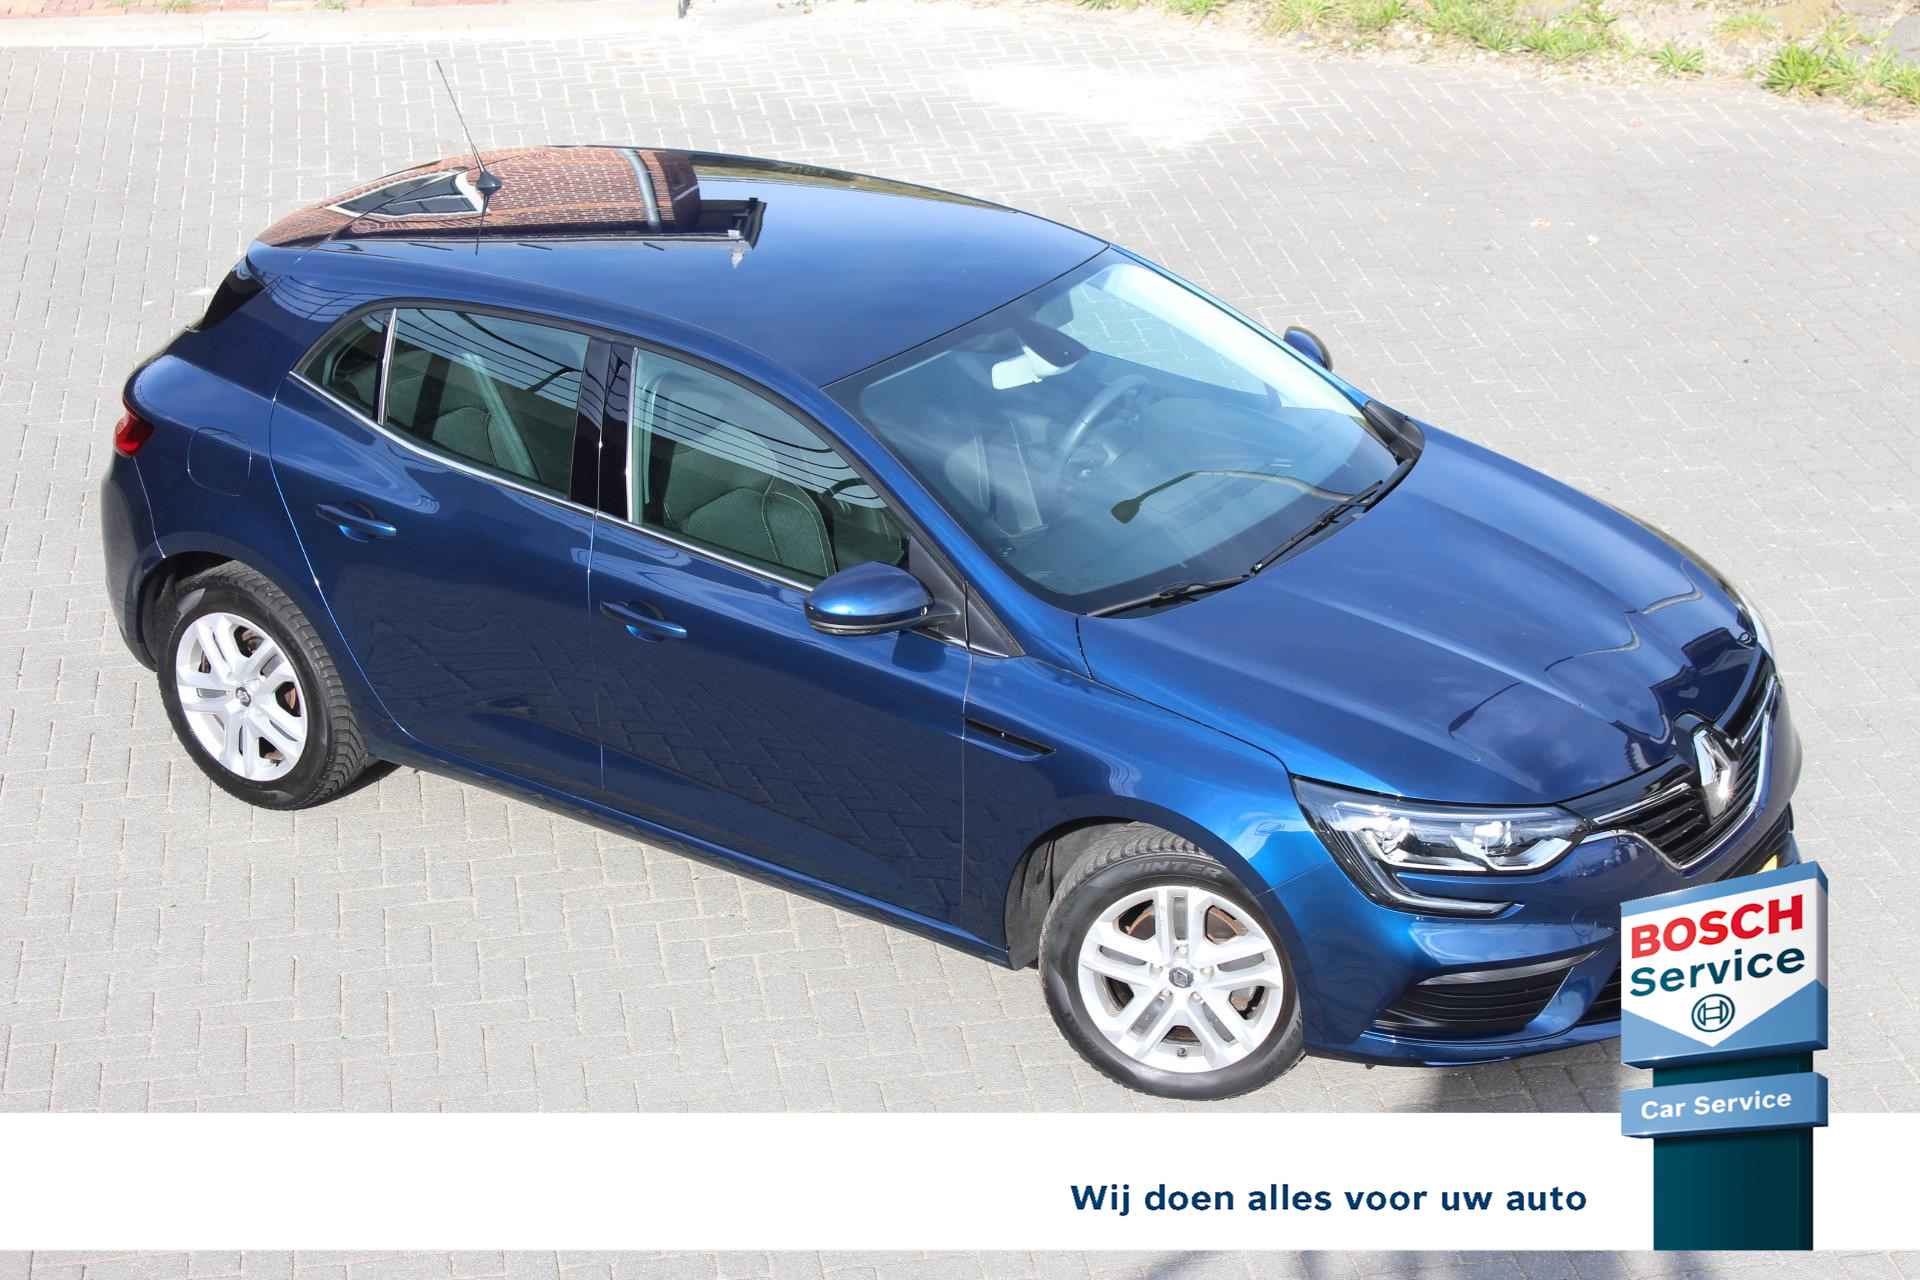 Renault Mégane 1.3 TCe Zen Dab+ audio Climate + cruise control Navi PDC achter Led verlichting voor + achter - 8/34